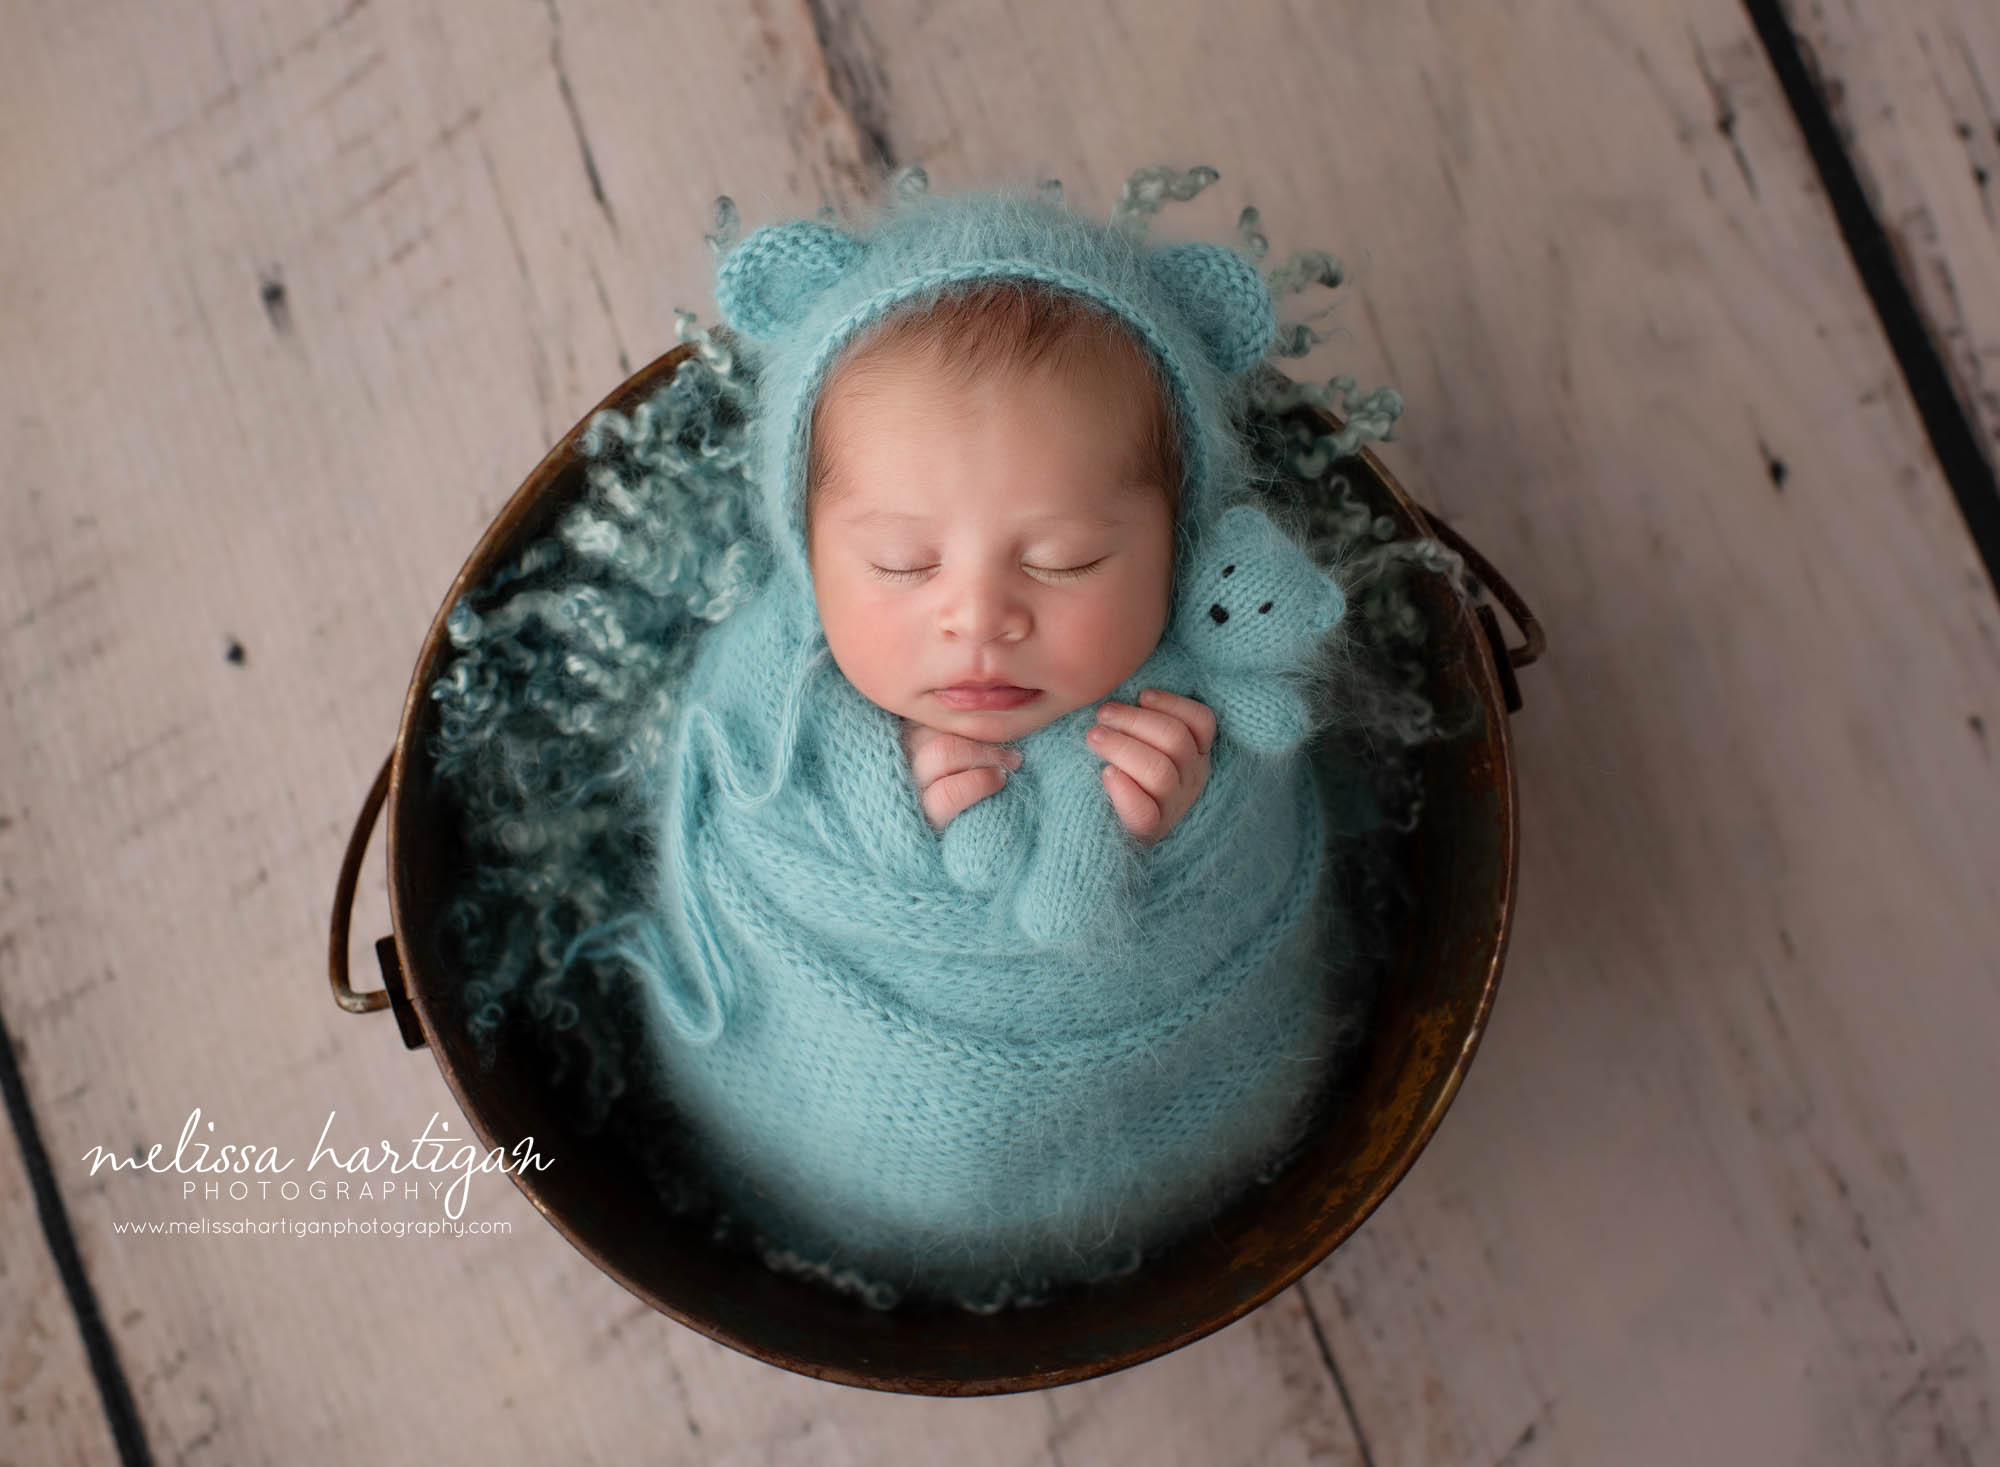 Newborn baby boy posed in bucket wearing teal colored knitted bear bonnet wrapped in knitted wrap with matching knitted teddy bear